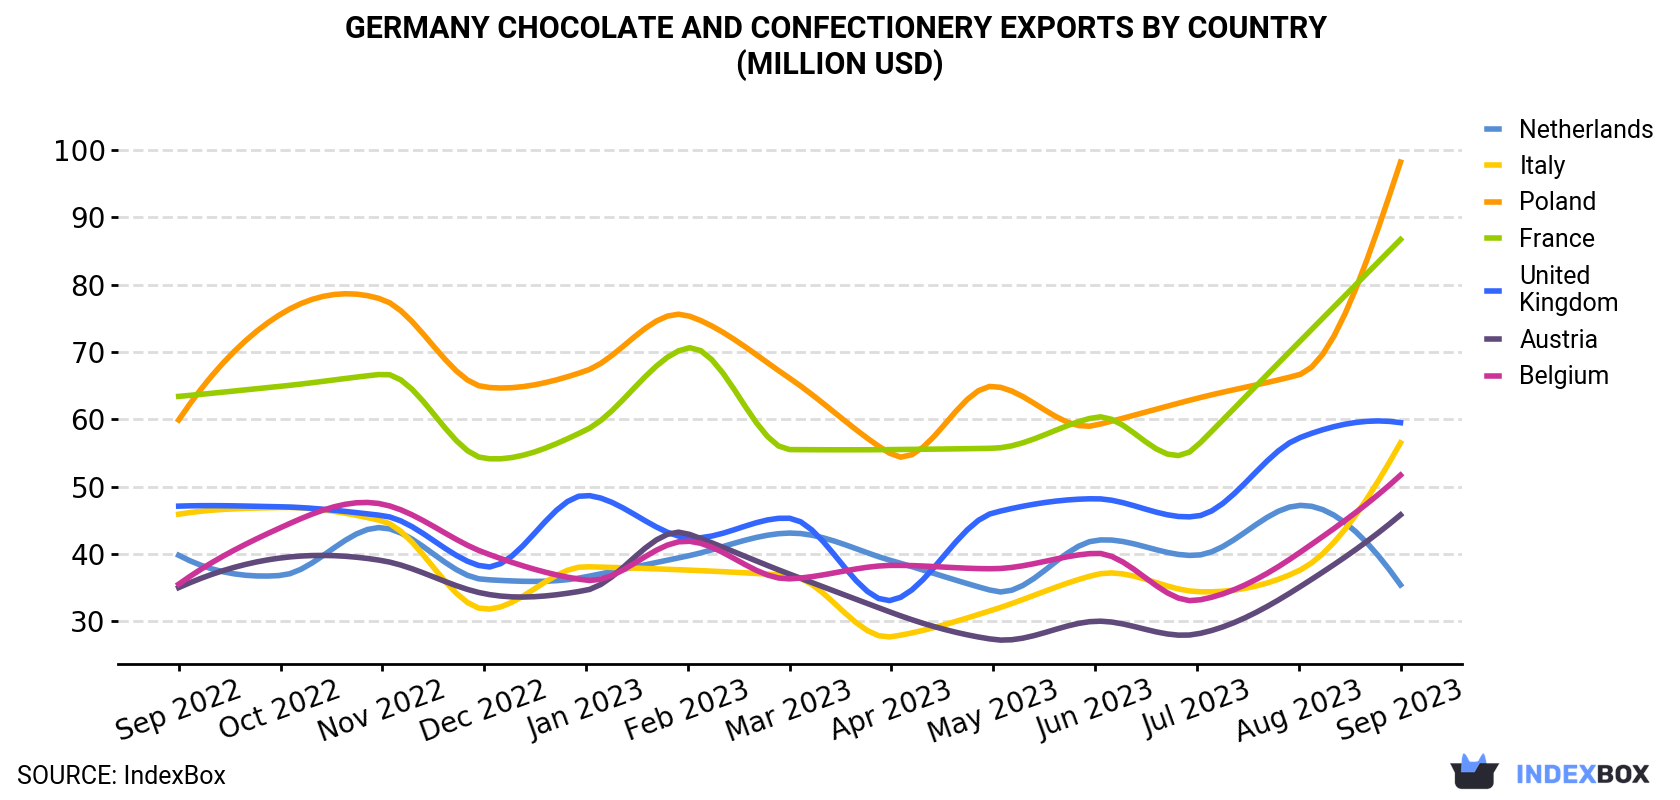 Germany Chocolate And Confectionery Exports By Country (Million USD)